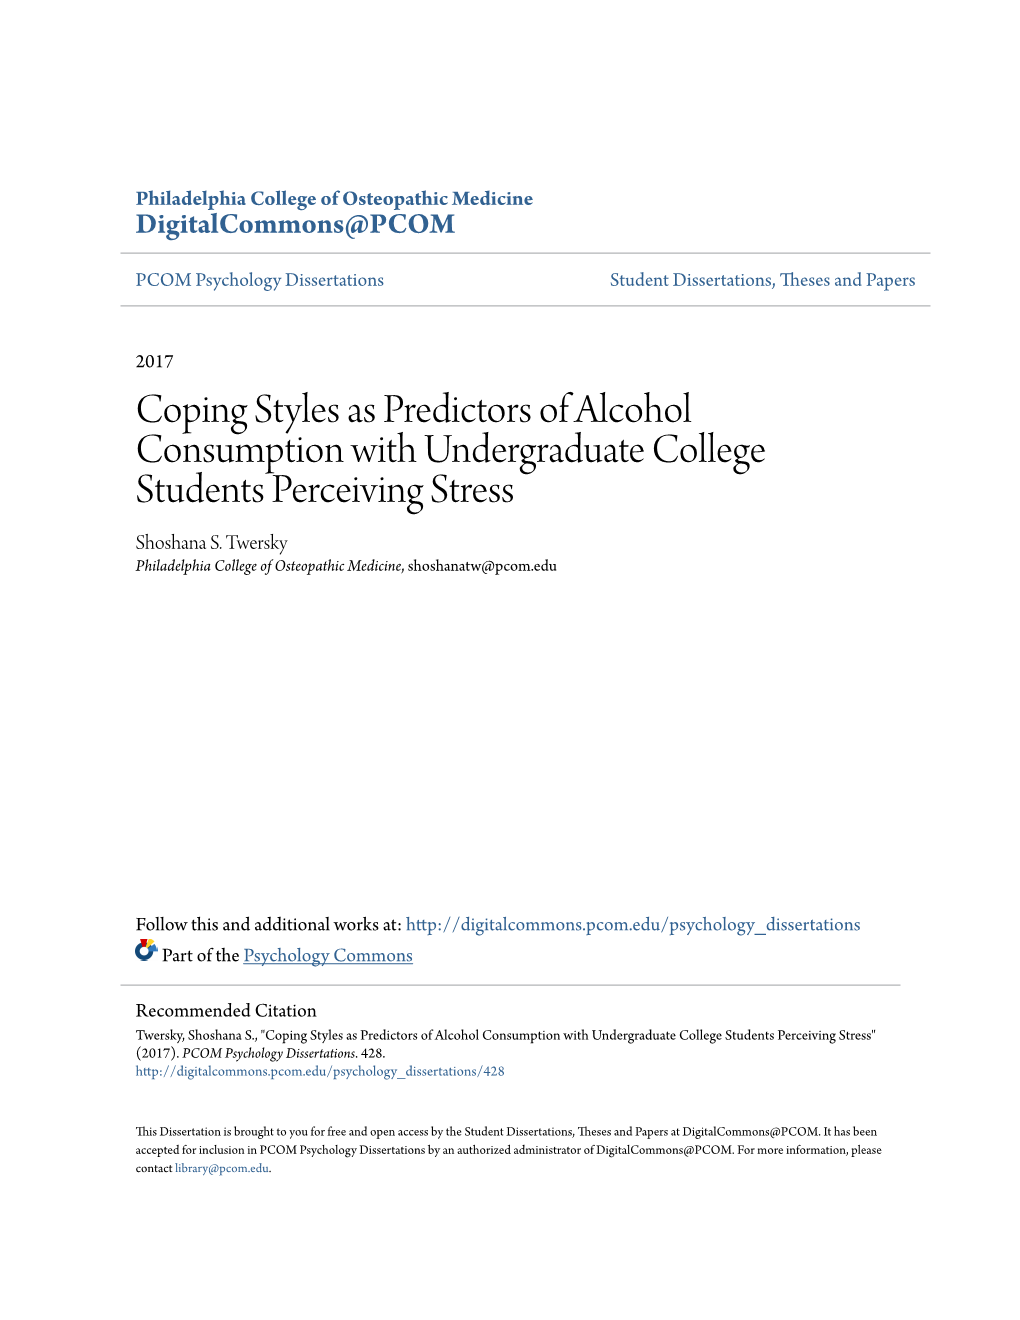 Coping Styles As Predictors of Alcohol Consumption with Undergraduate College Students Perceiving Stress Shoshana S